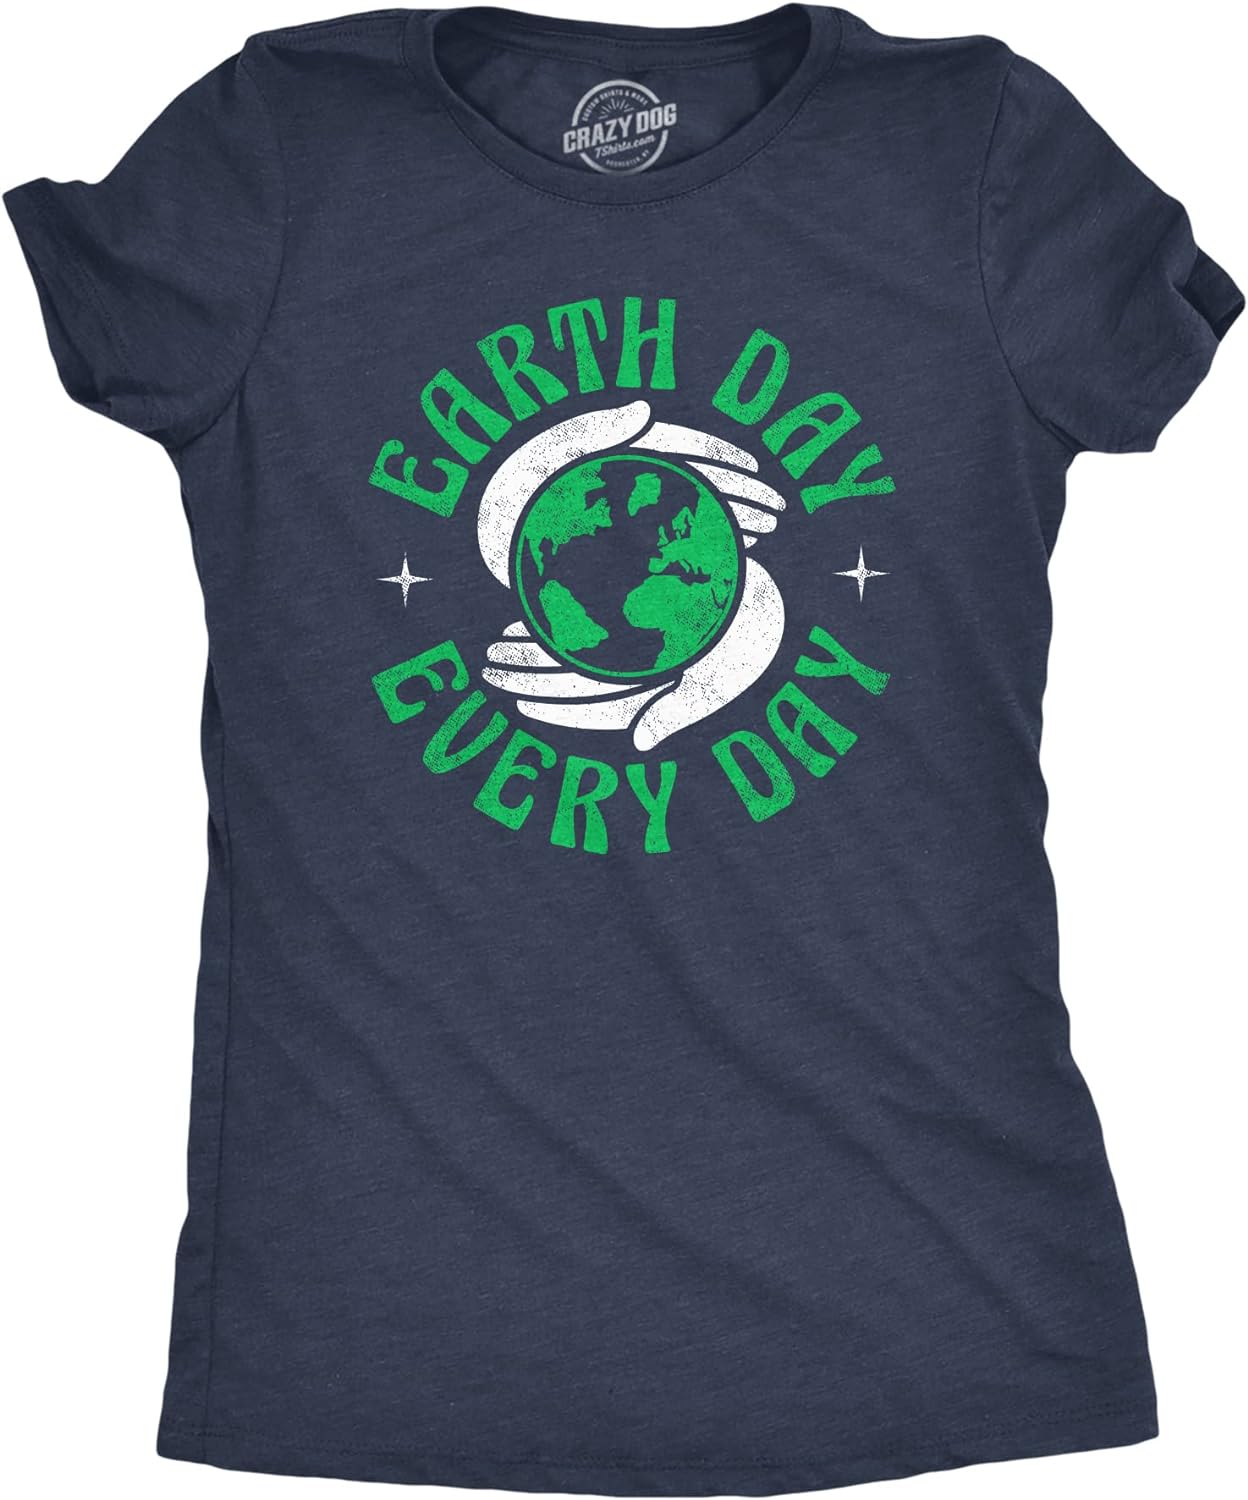 Earth Day T-shirt Receives Rave Reviews